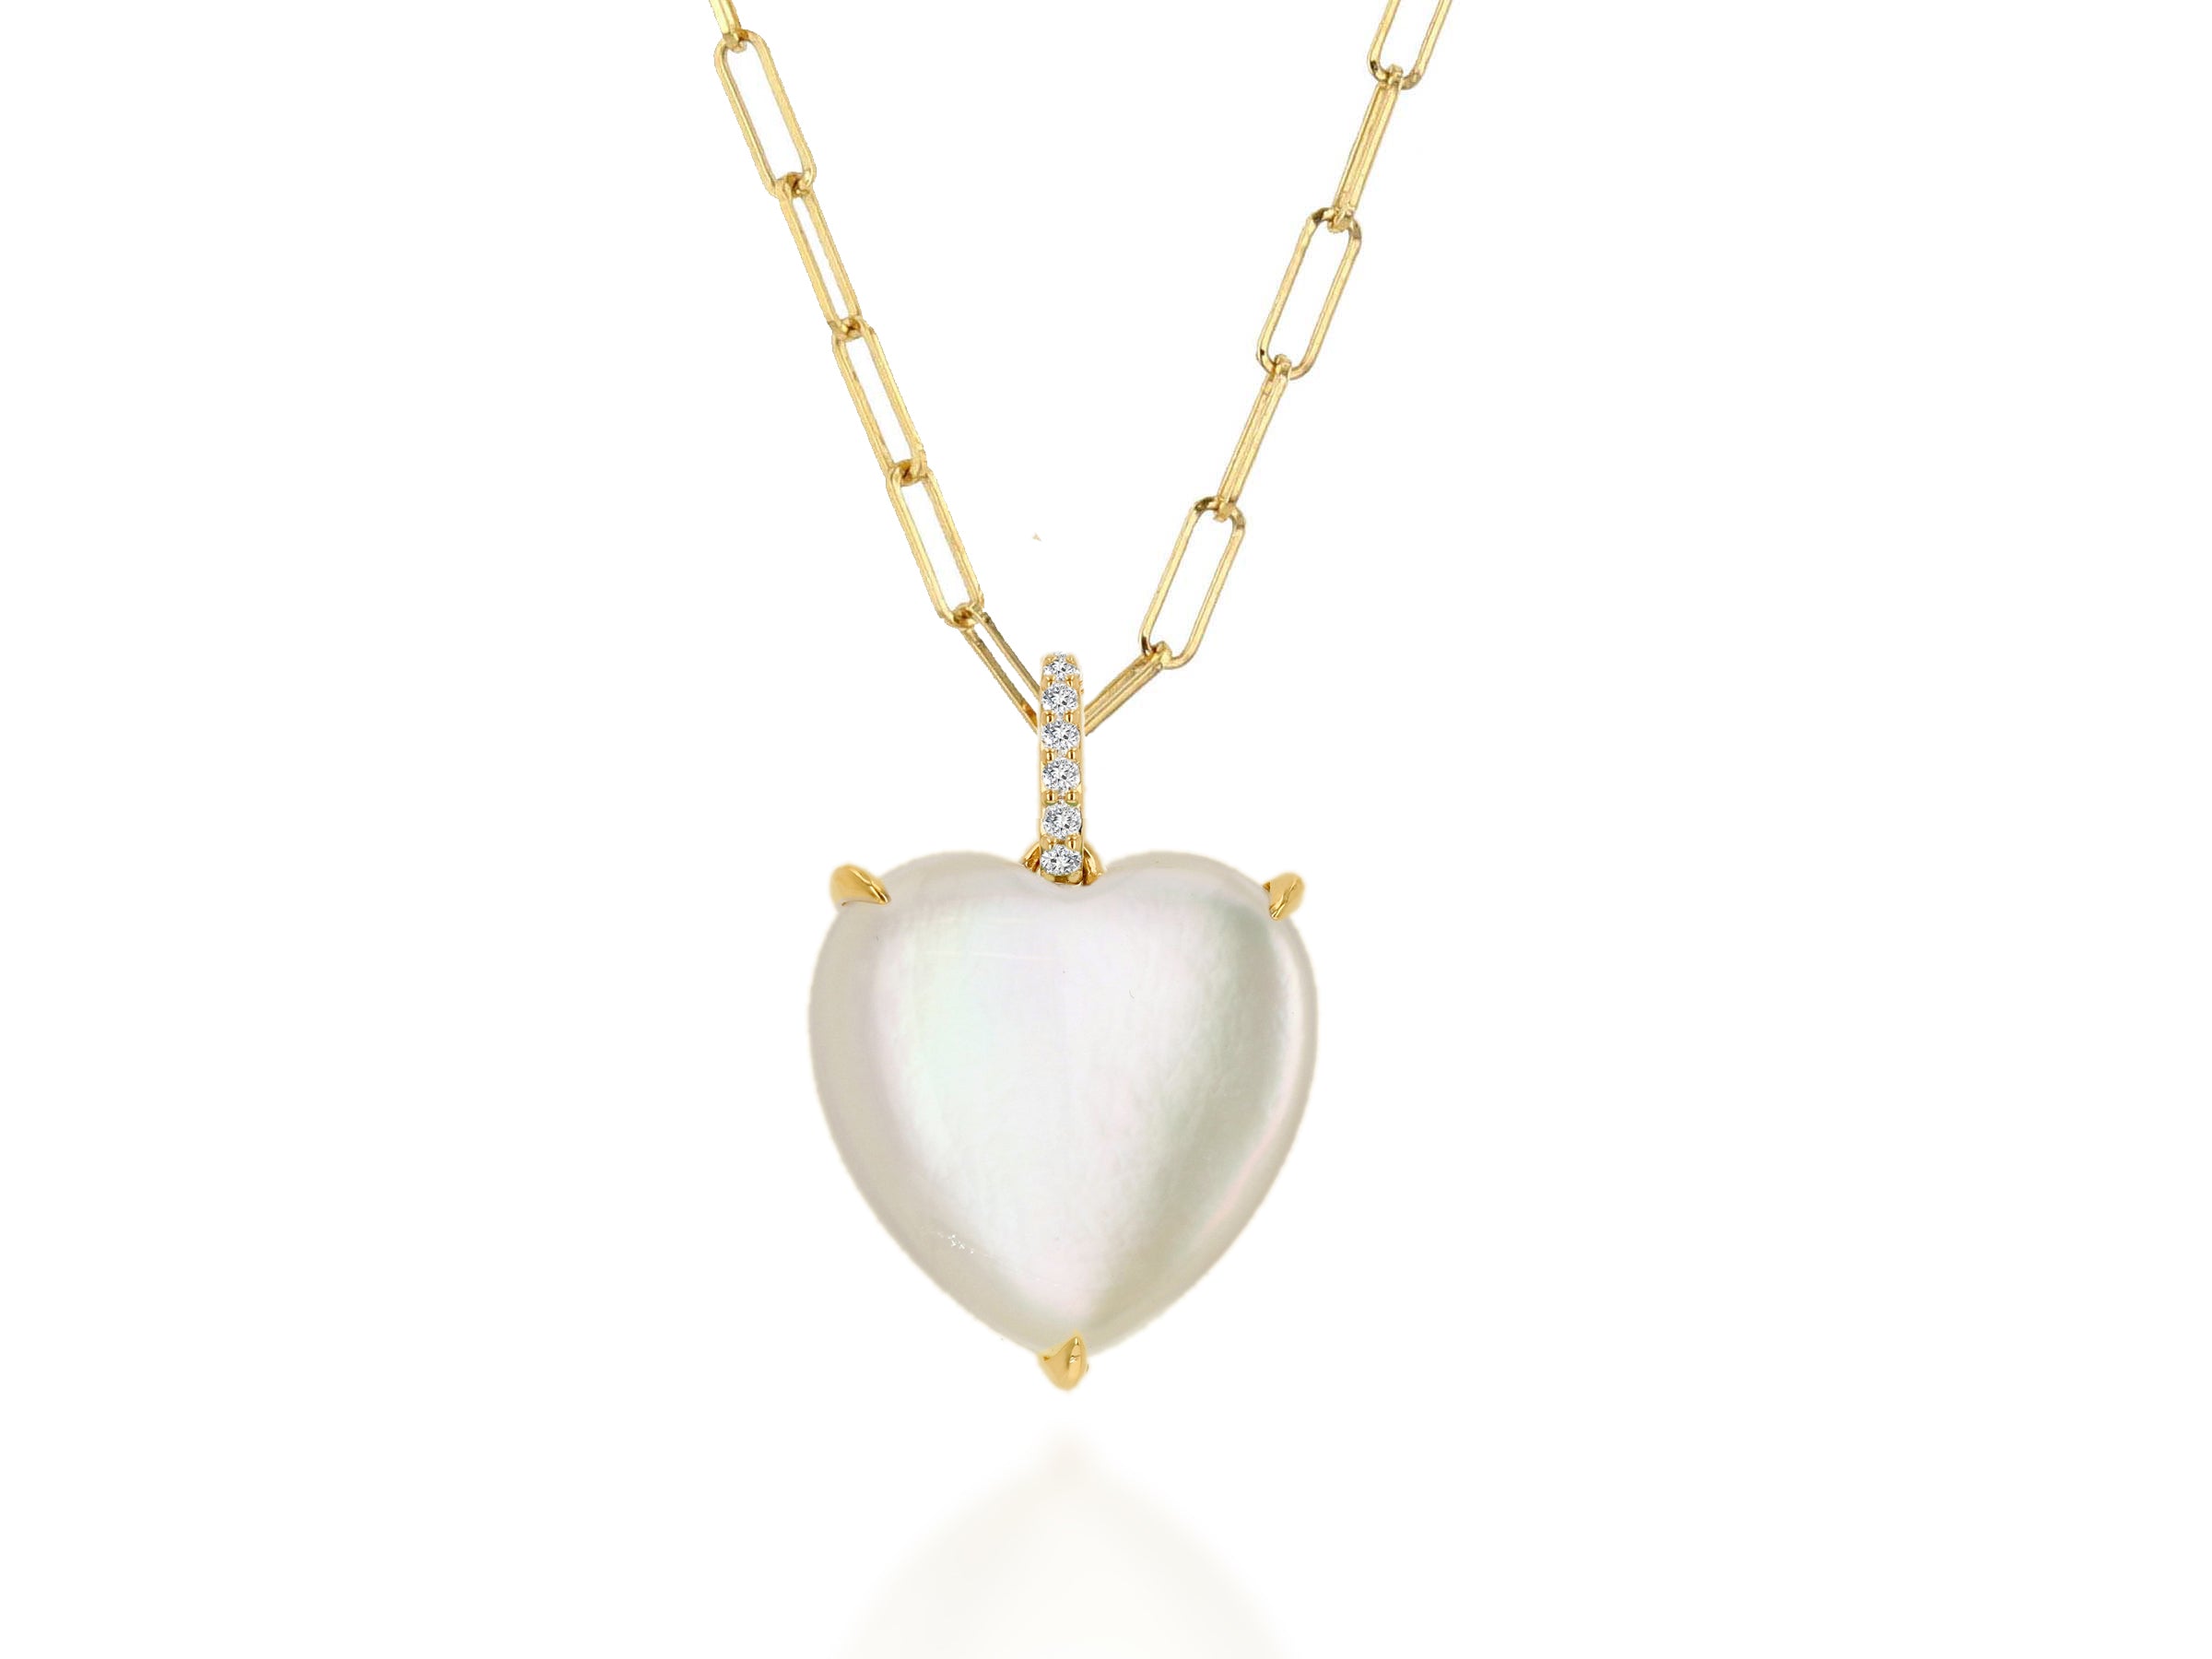 Oversized Mother of Pearl Gemstone Heart Charm